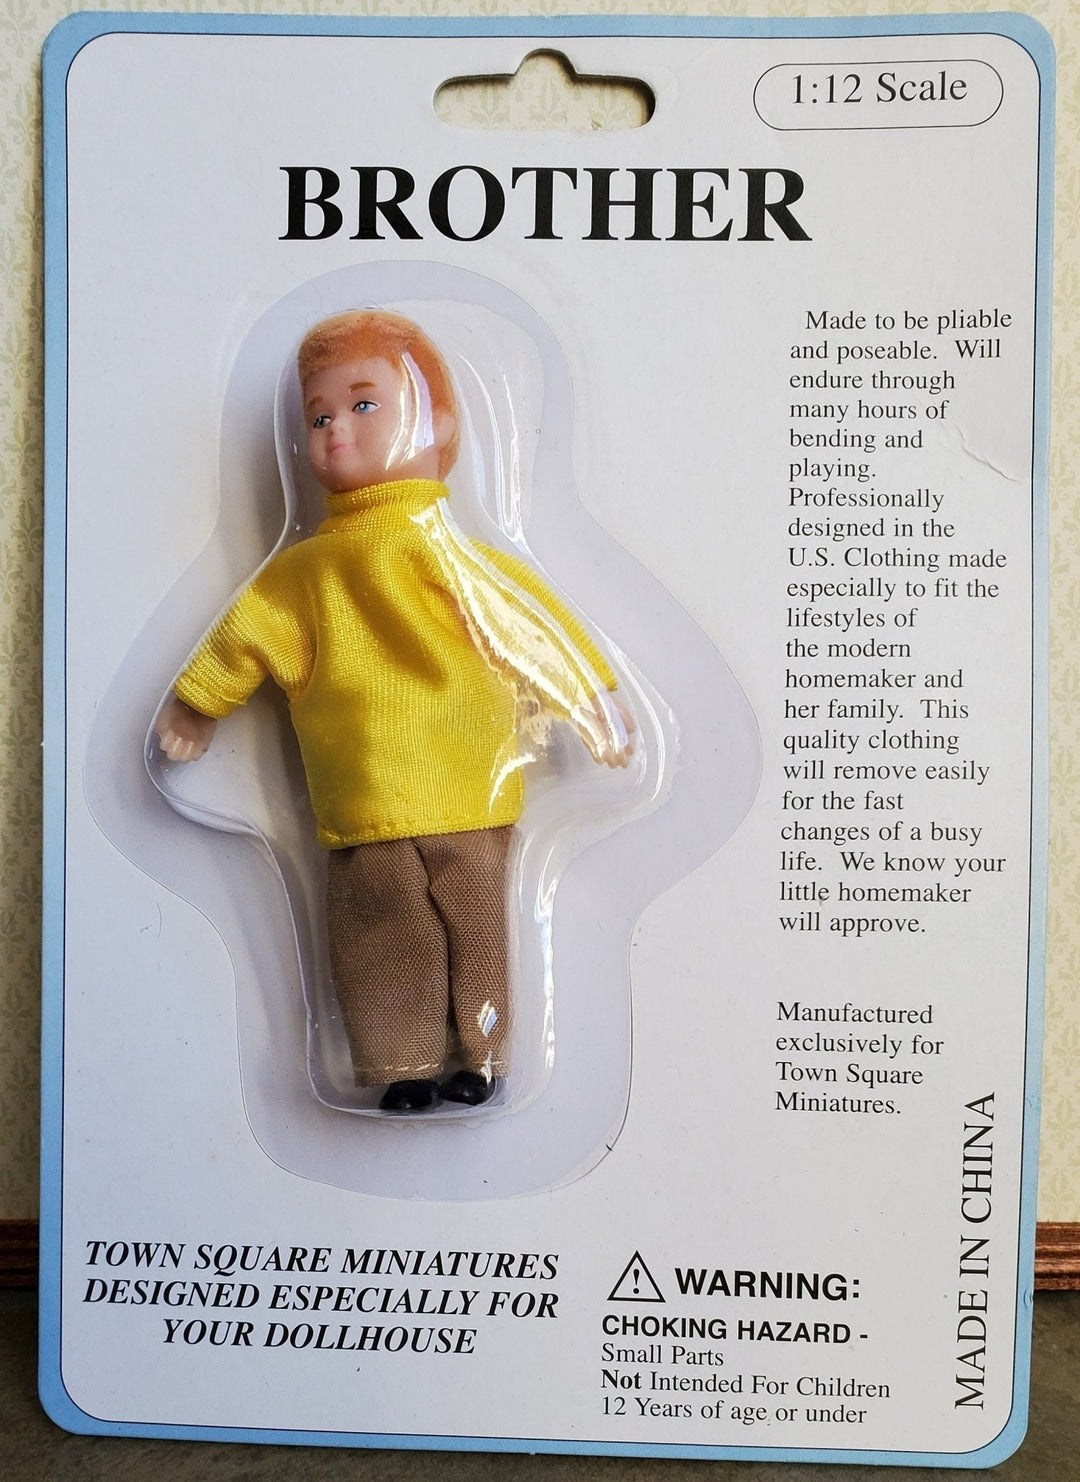 Dollhouse Boy Doll Modern Young Brother 1:12 Scale Miniature Removable Clothes 3 1/2" - Miniature Crush